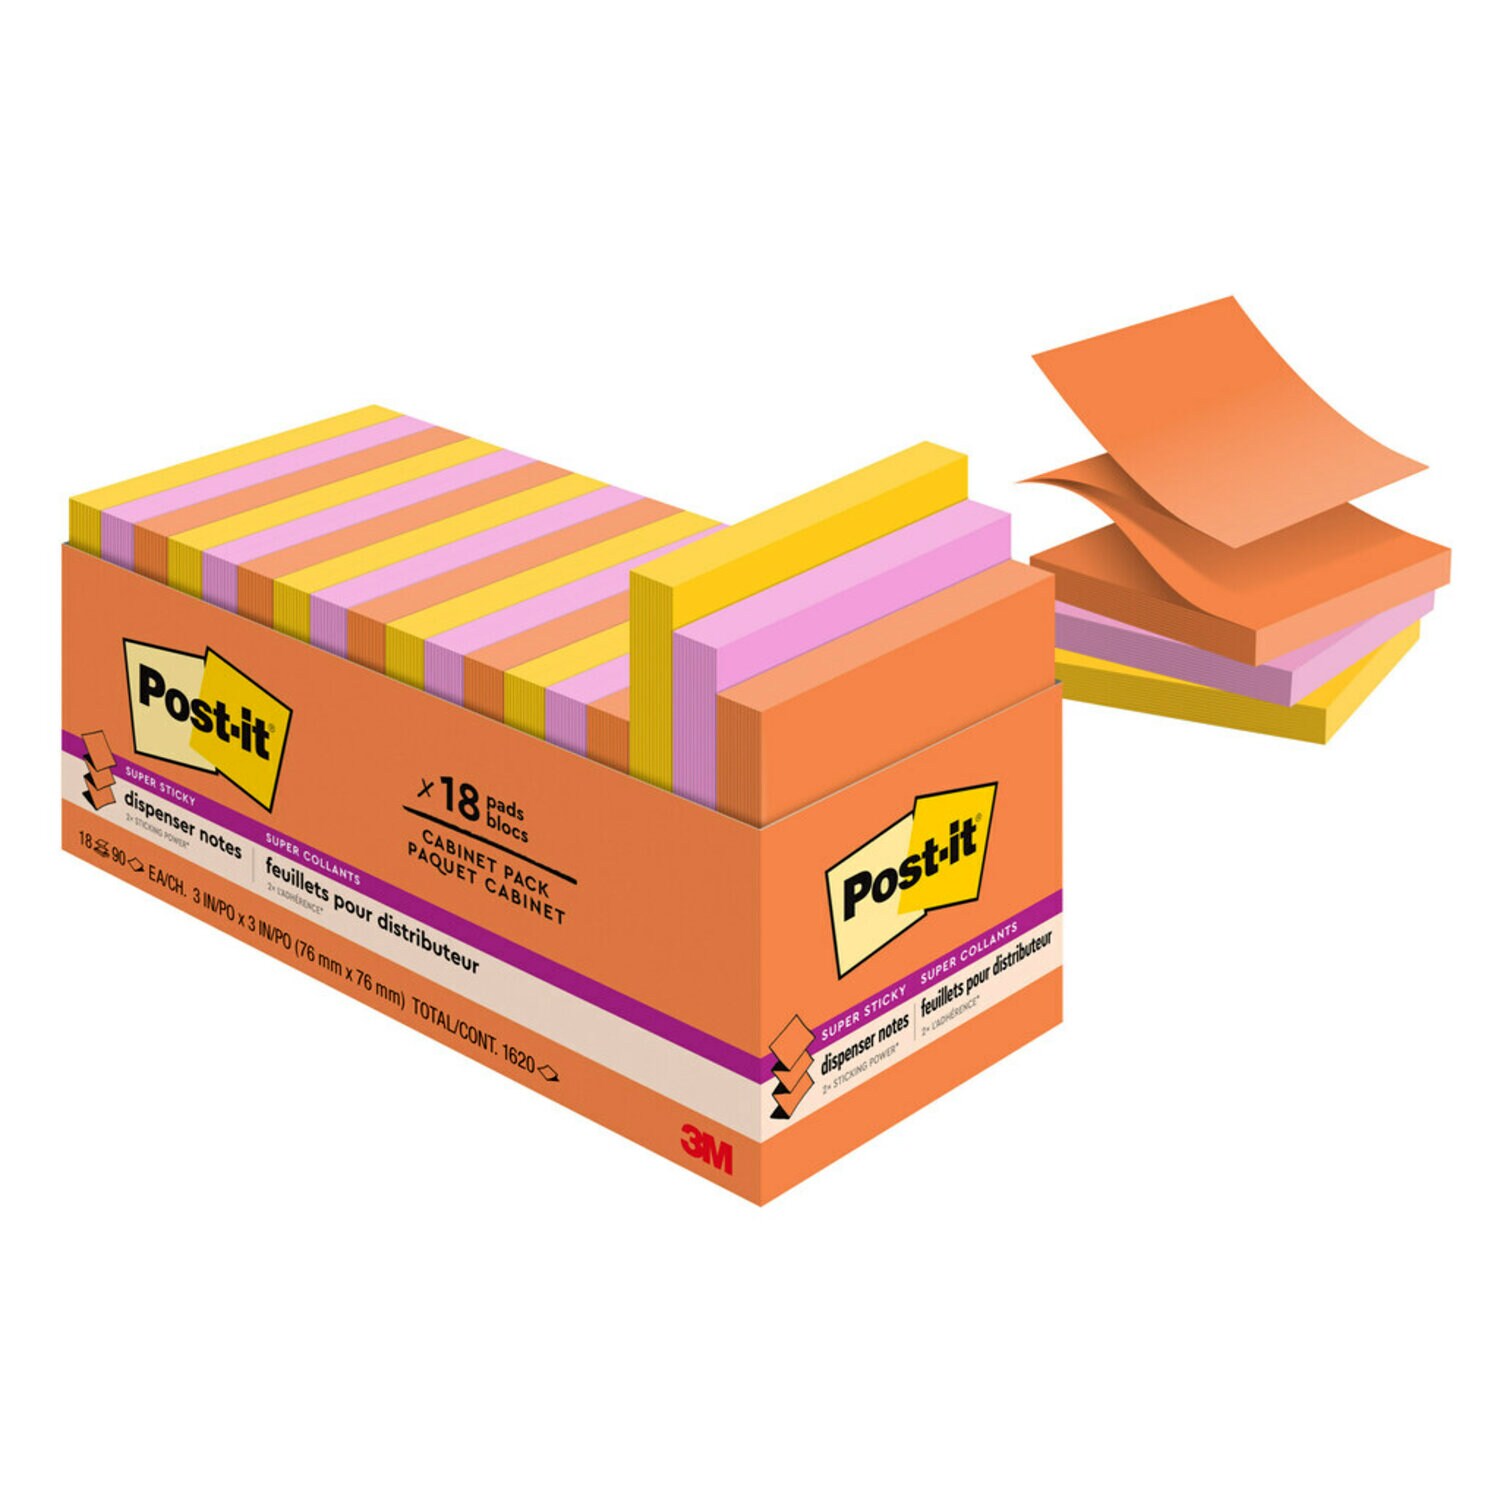 7010372359 - Post-it Dispenser Pop-up Notes R330-18SSAUCP, 3 in x 3 in, 18 pads, Energy Boost Collection